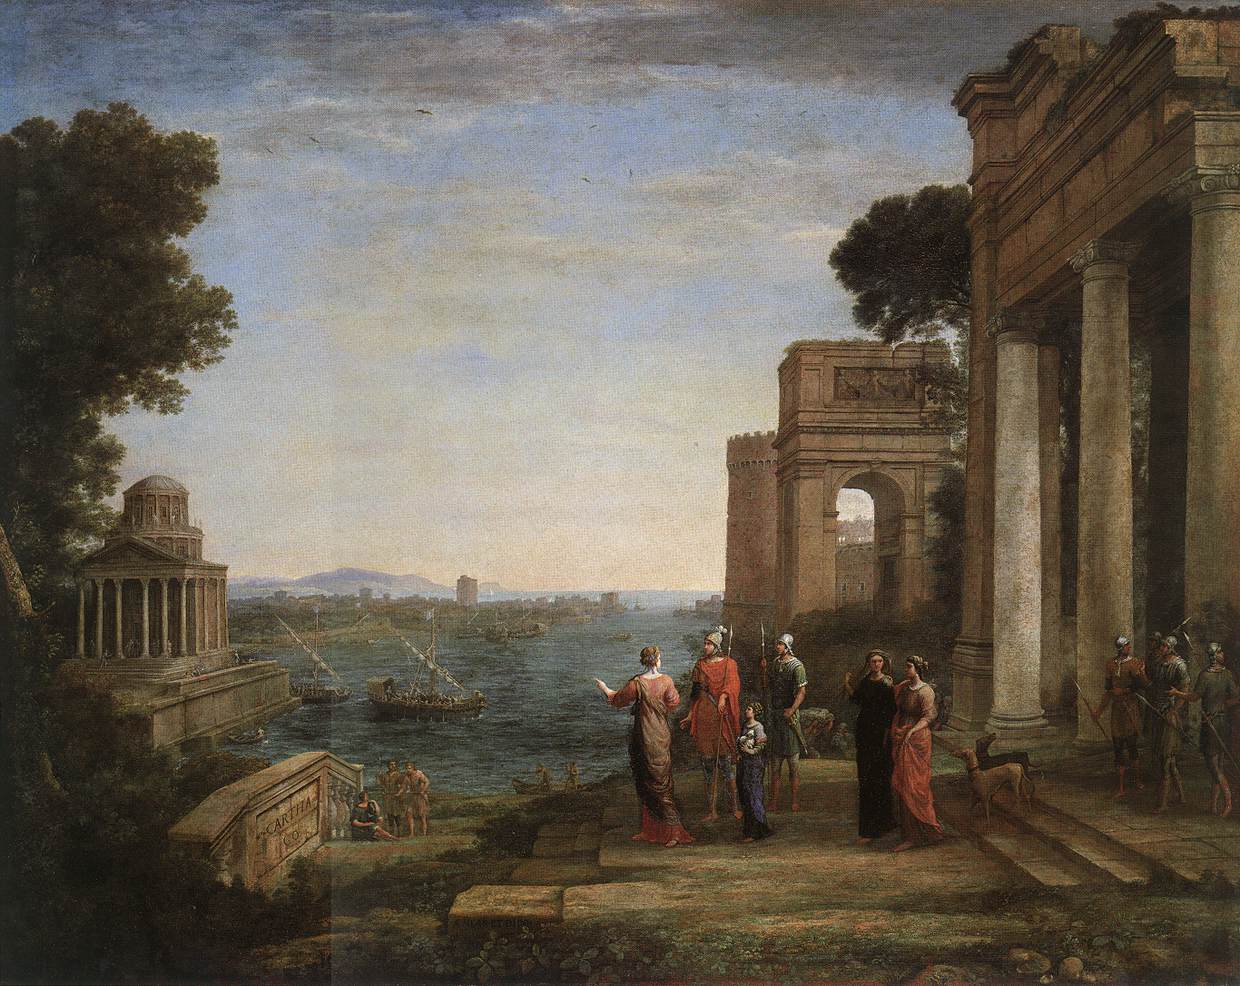 Dido's Farewell to Aeas in Carthage